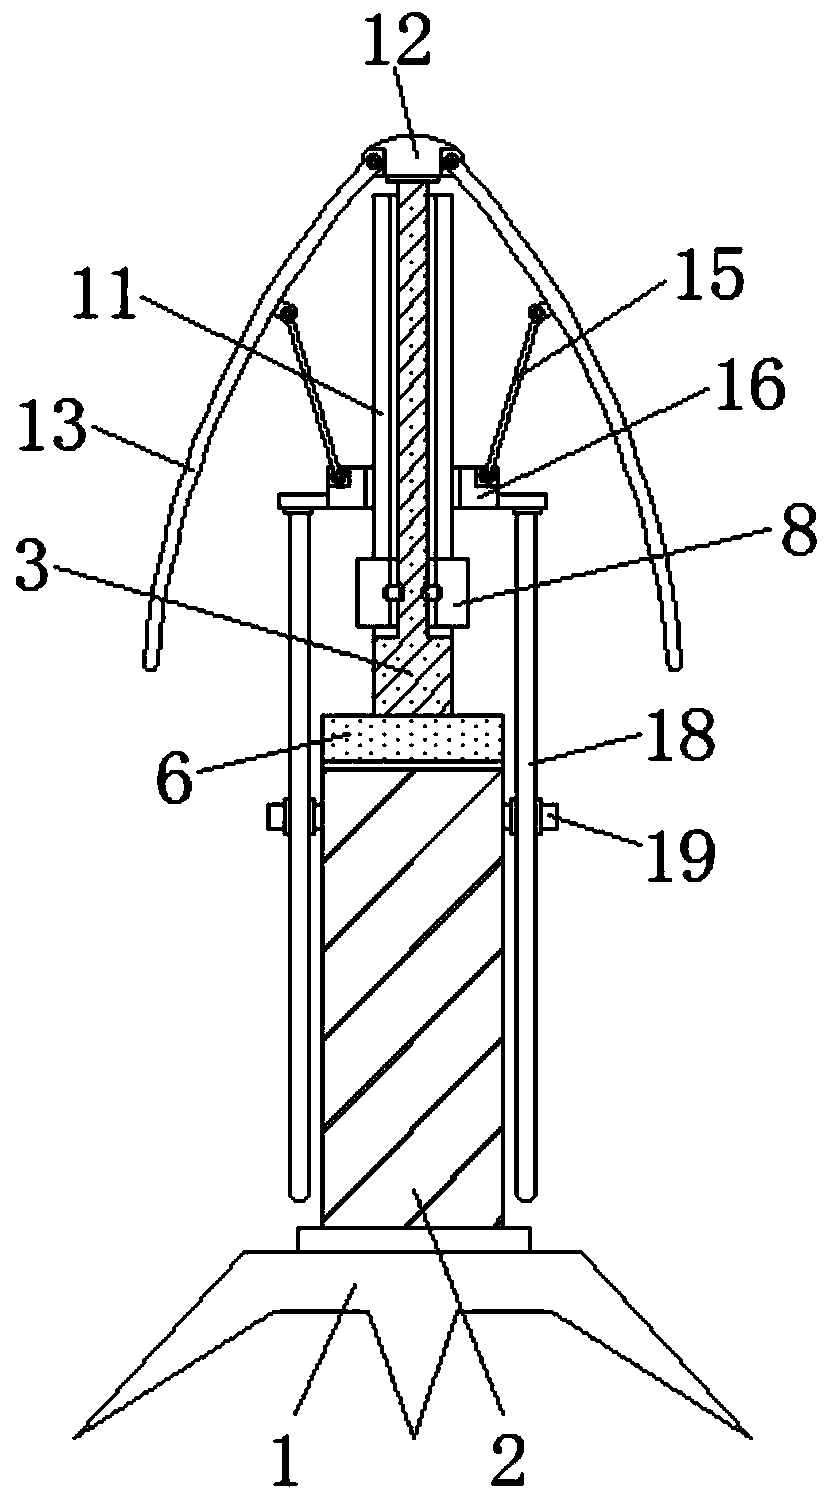 Supporting device for tunnel construction